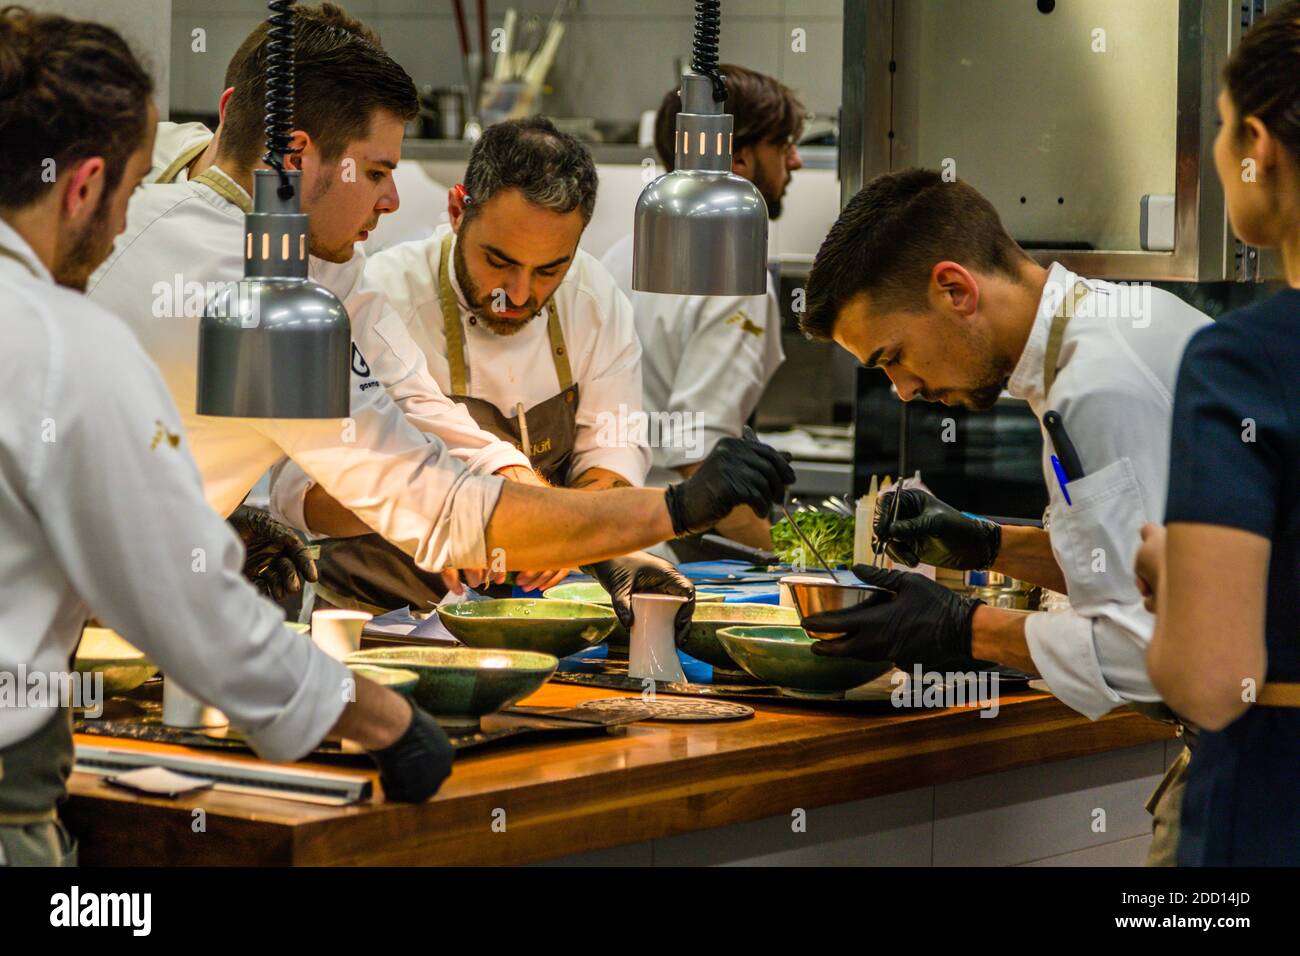 Abraham Artigas concentrates on working with his kitchen team in Sant Feliu de Guíxols, Spain Stock Photo